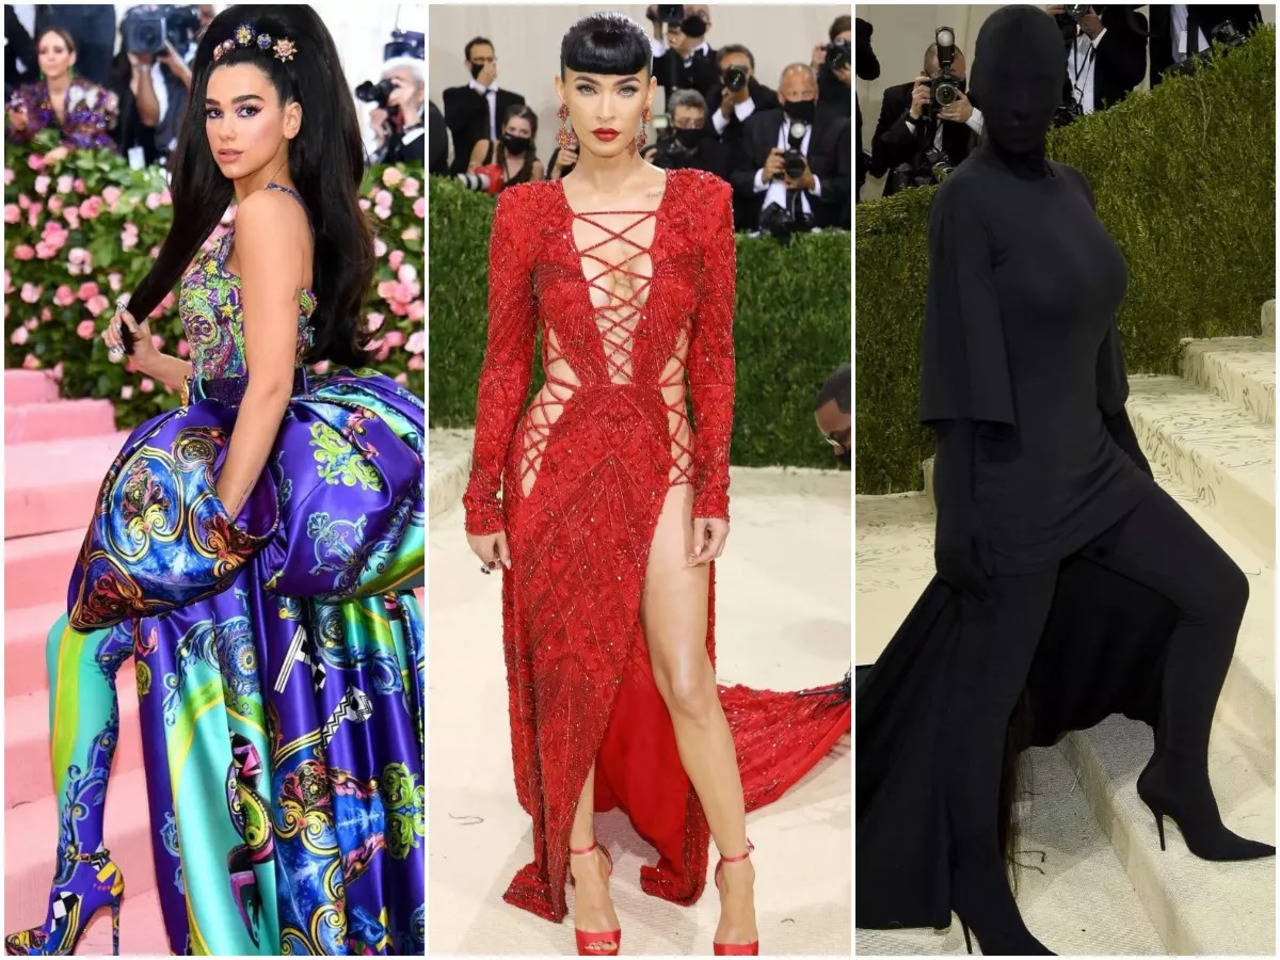 Met Gala 2023: The Theme, Date, Hosts, Attendees & Everything You Need To  Know